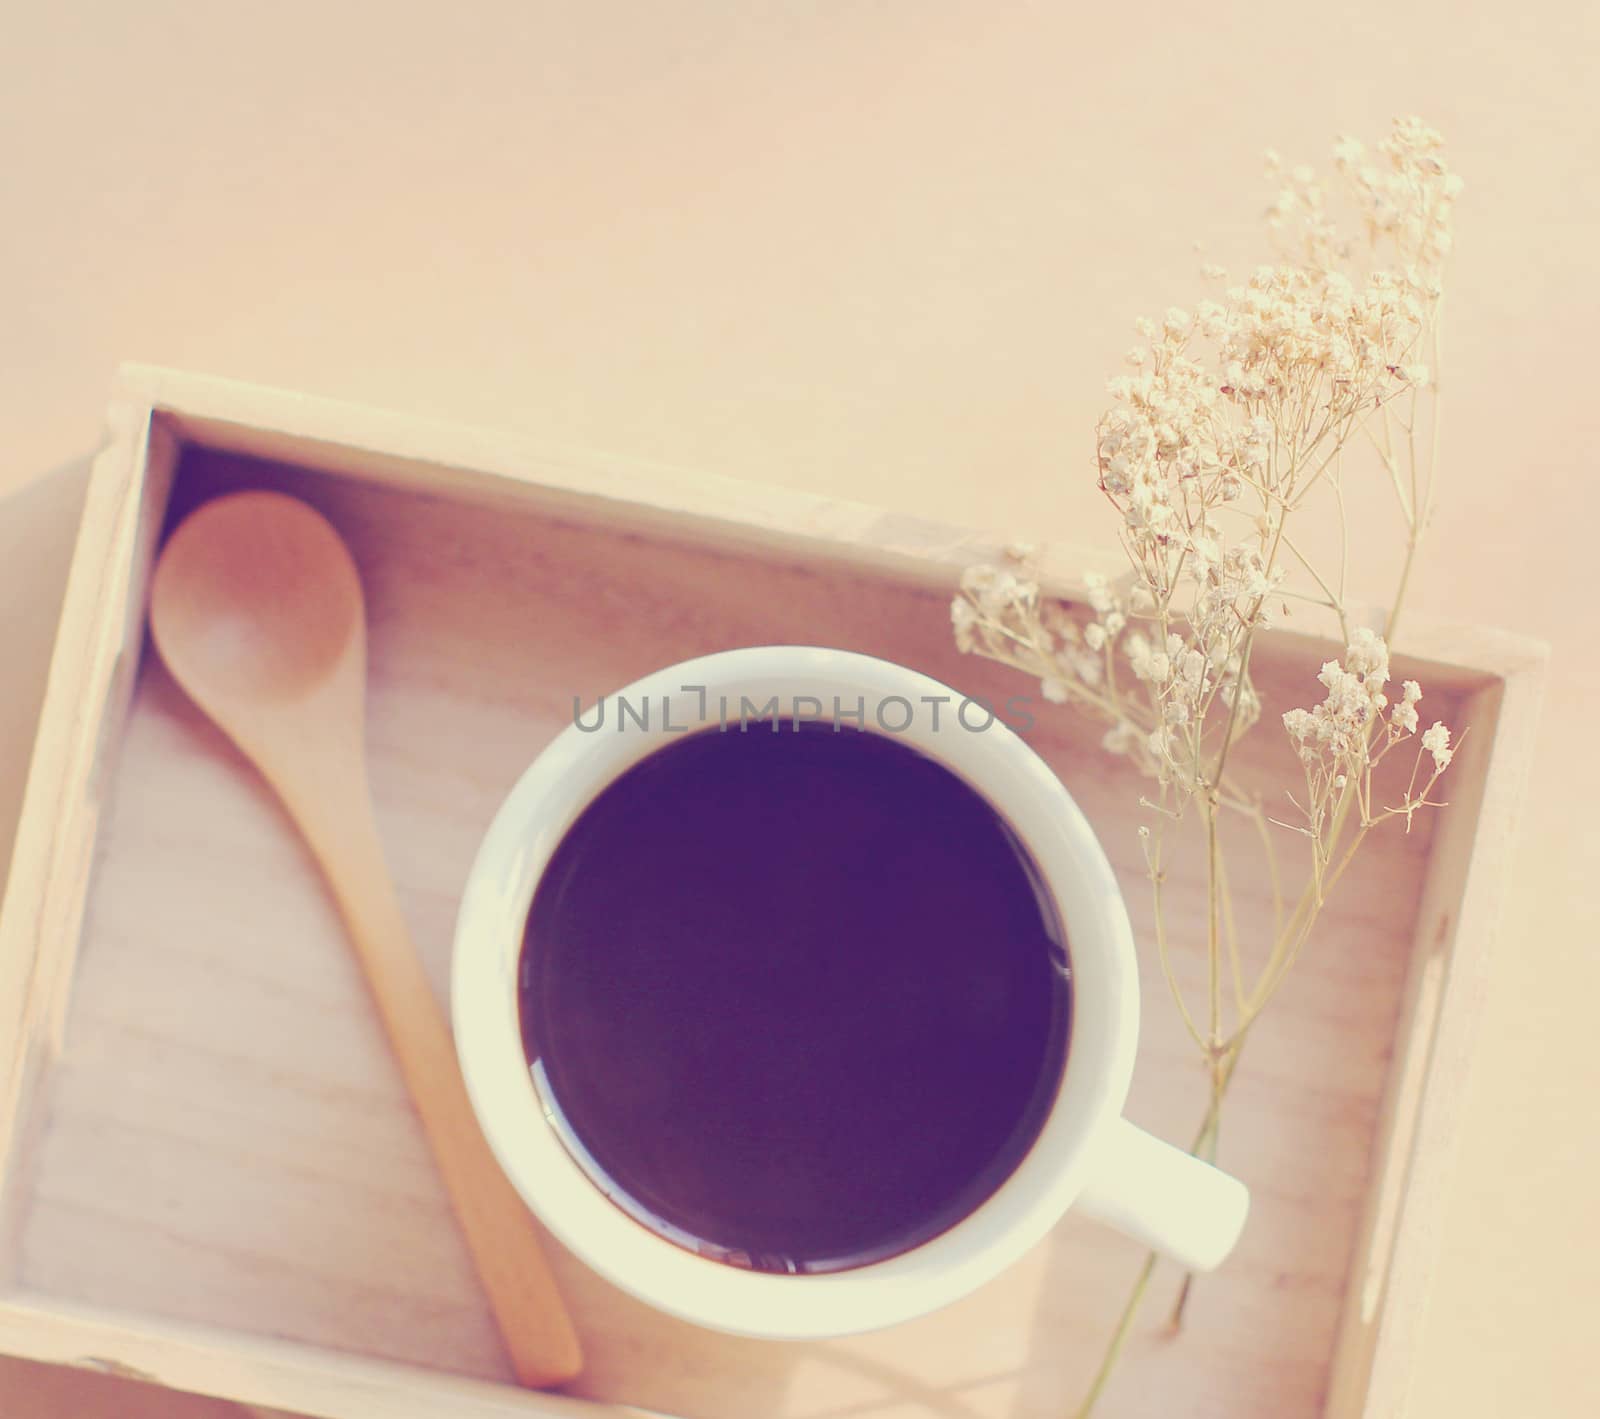 Black coffee and spoon on wooden tray with dried flower, retro filter effect